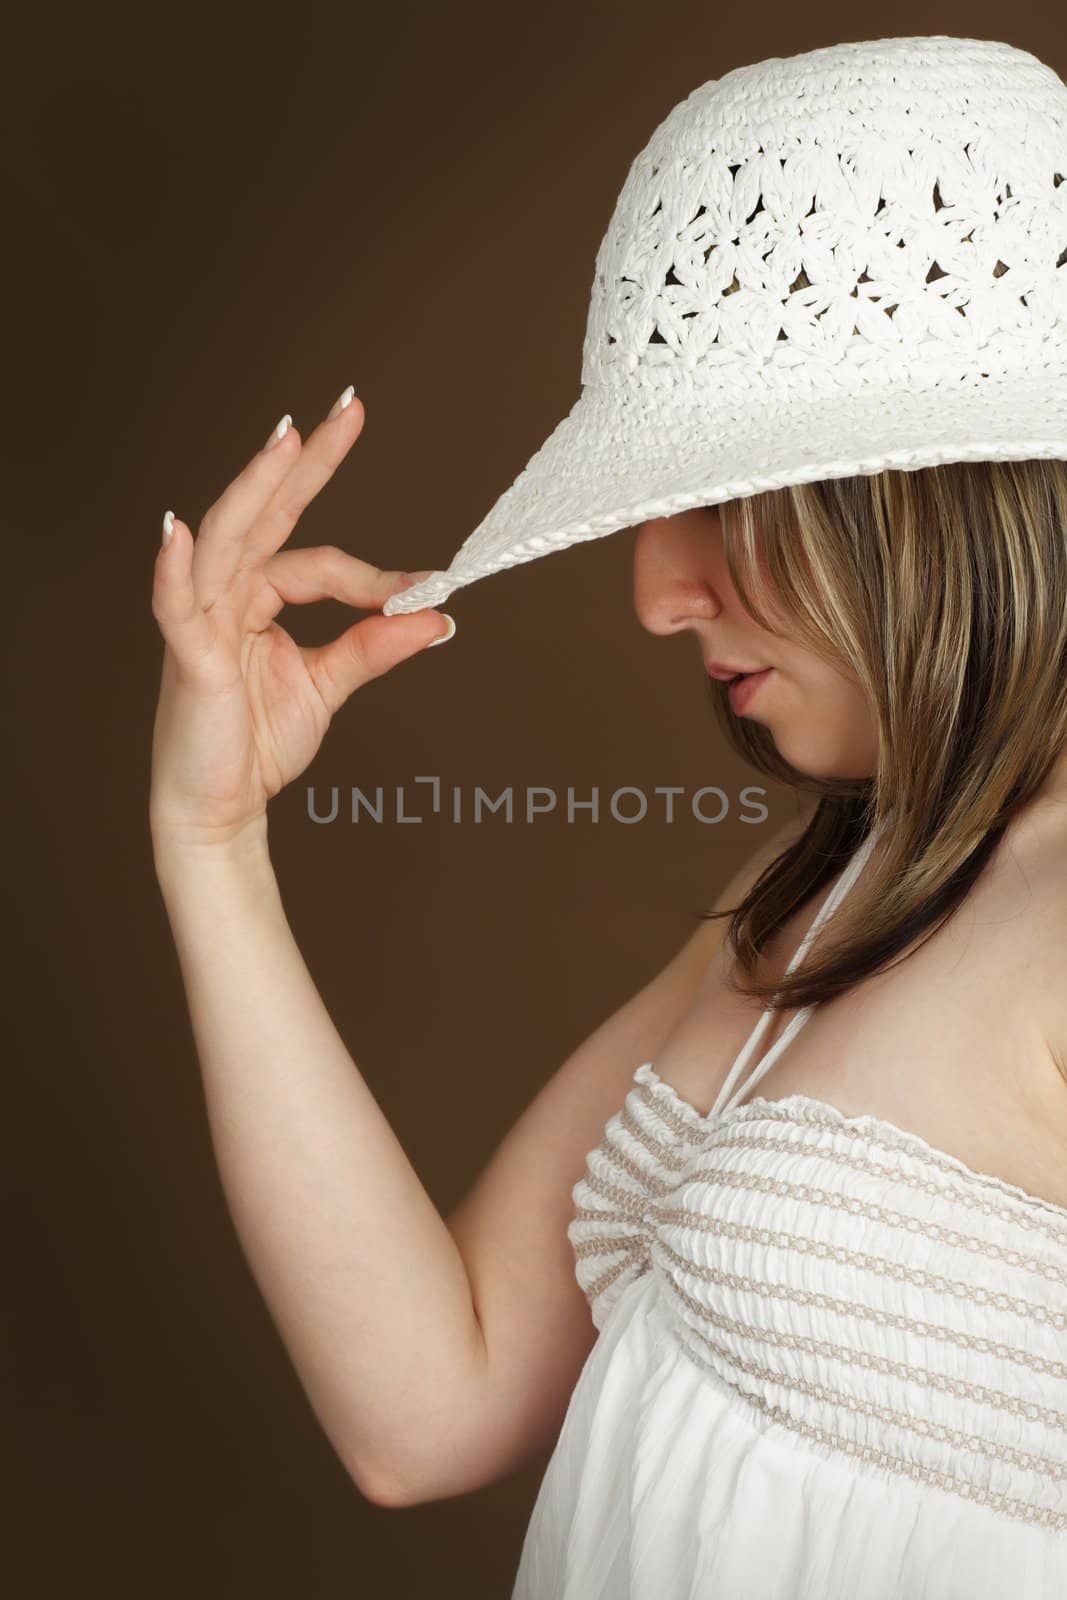 portrait of a woman wearing white hat, brown background